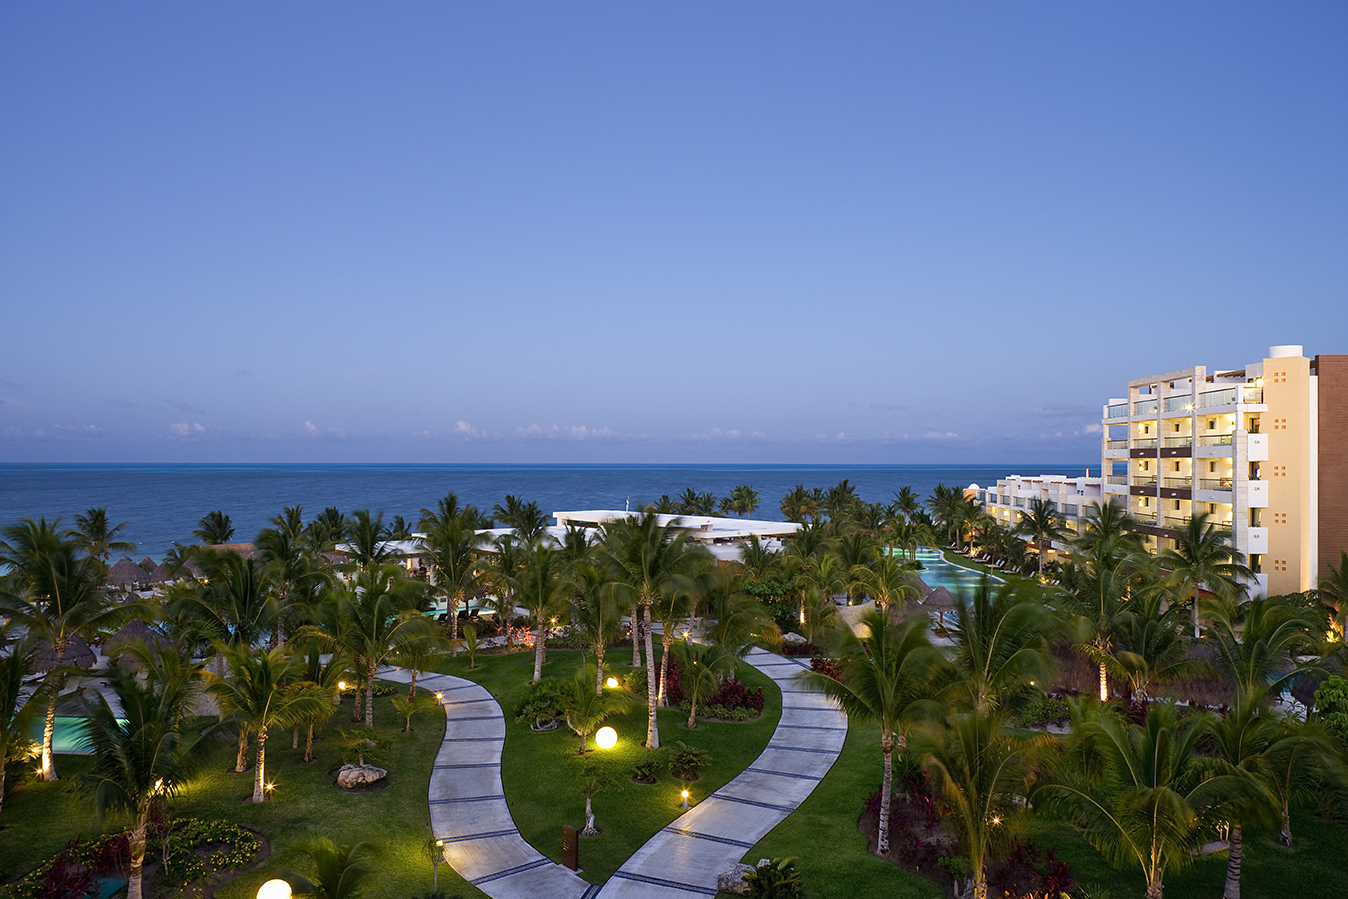 Excellence Playa Mujeres overlooks the Caribbean ocean